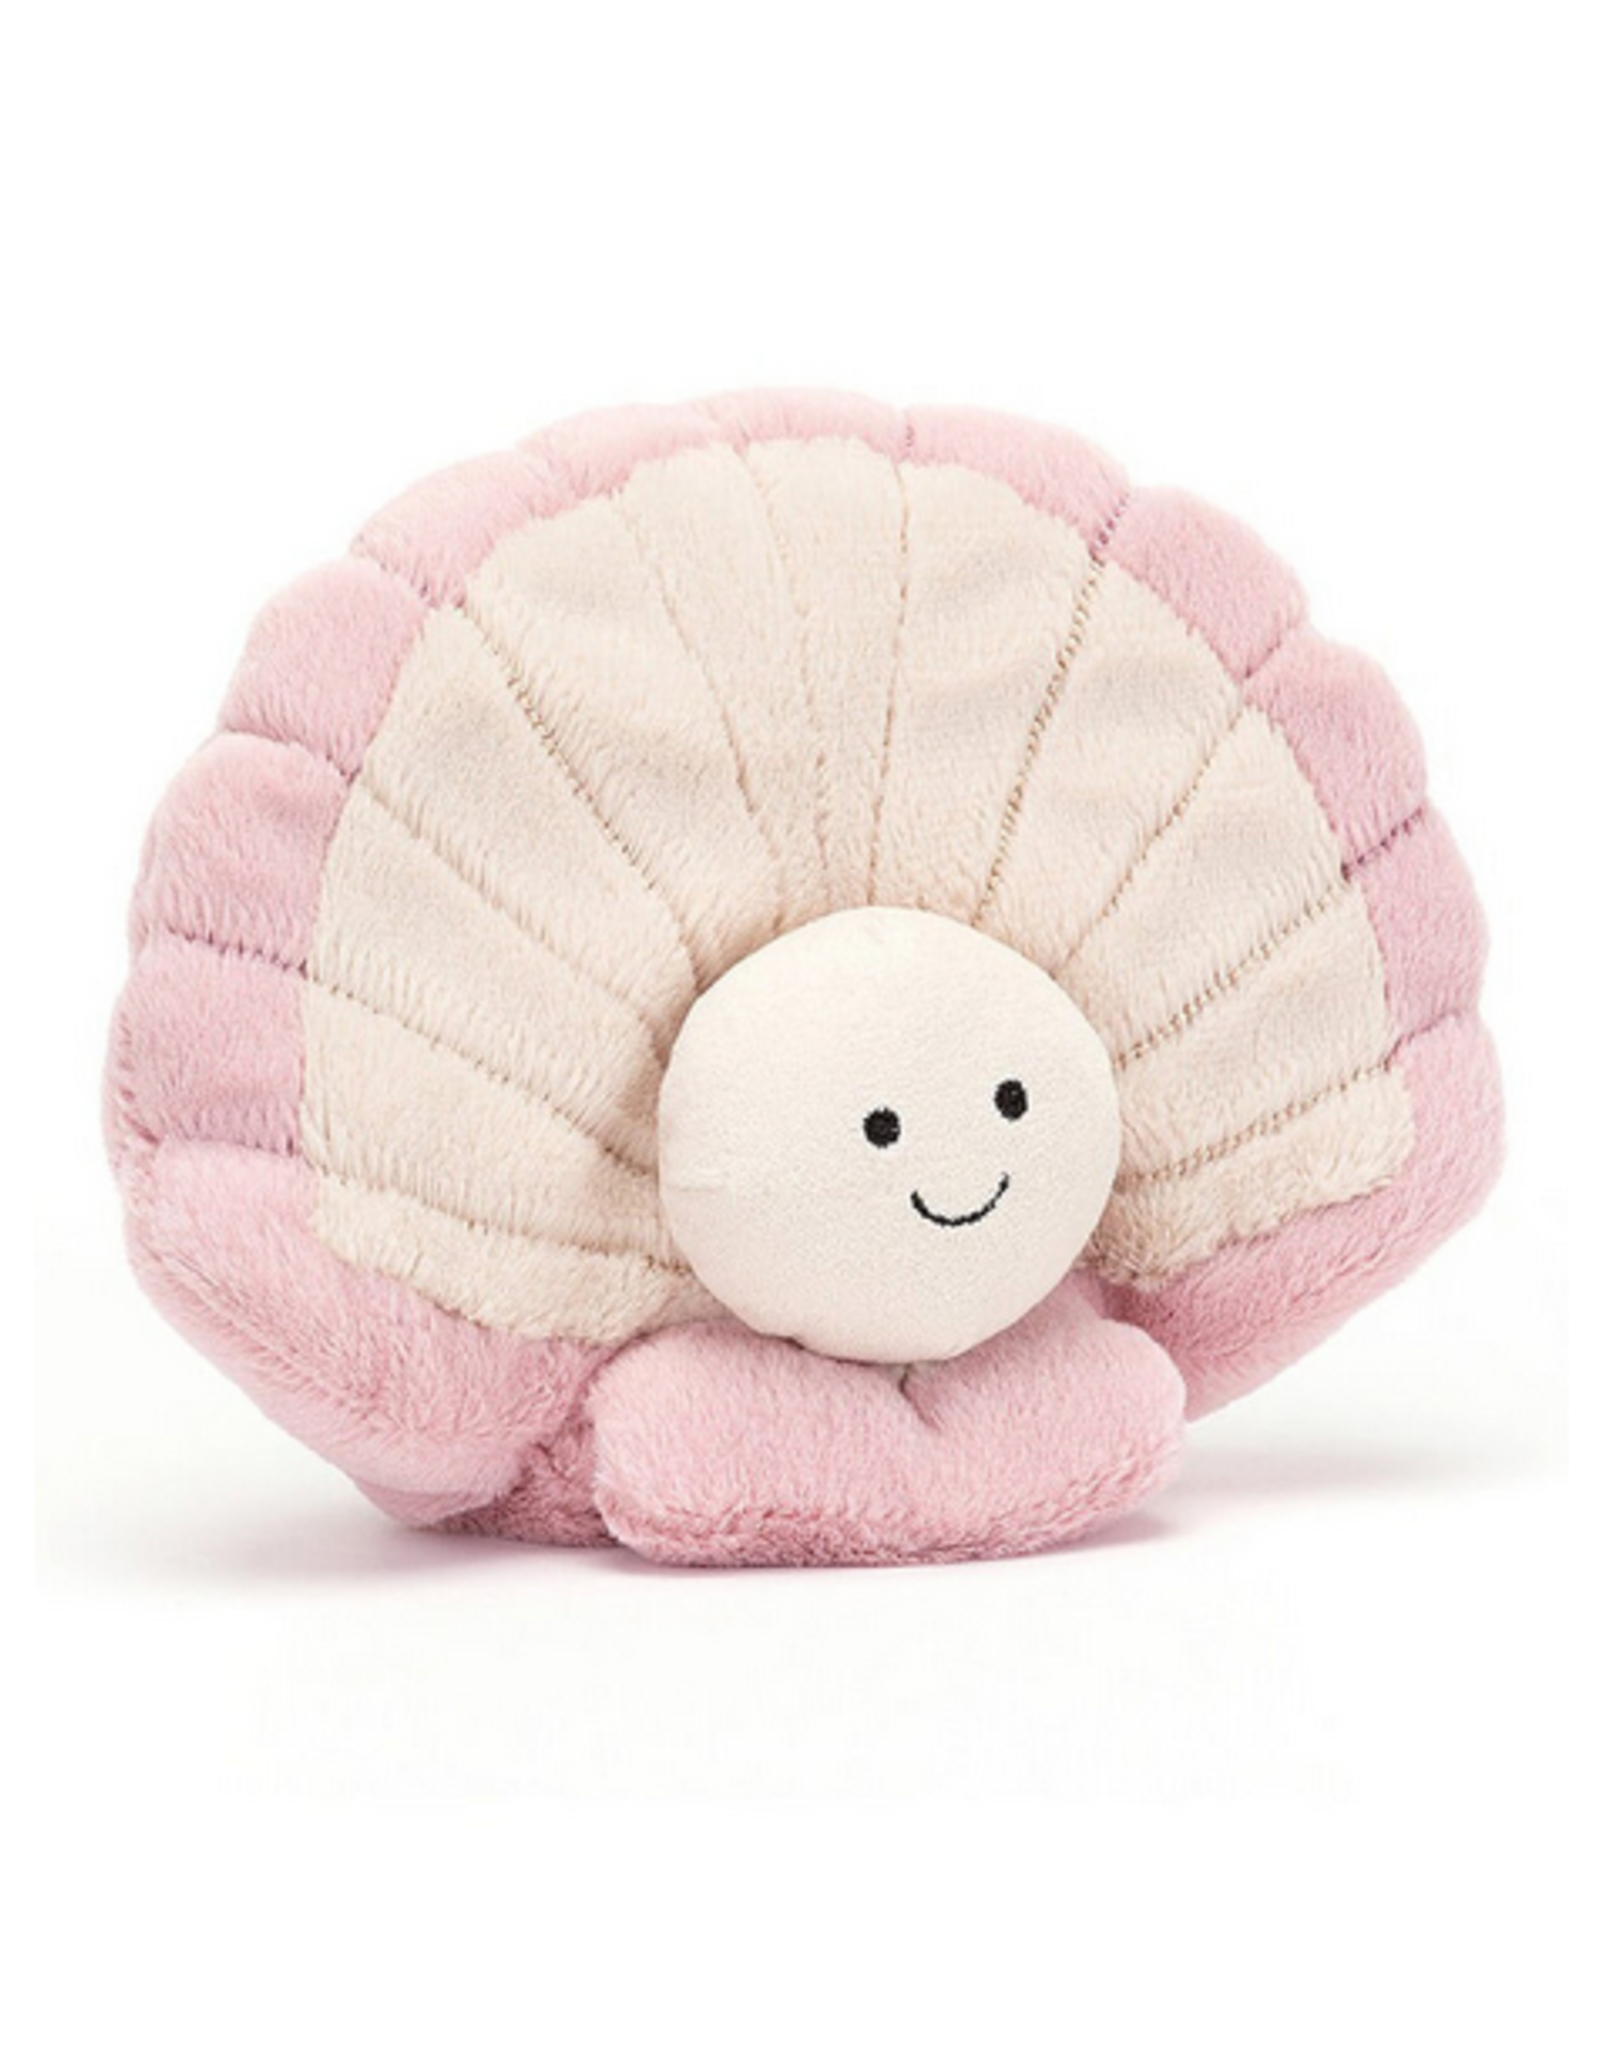 Jellycat Jellycat CLE3CLAM Clemmie Clam